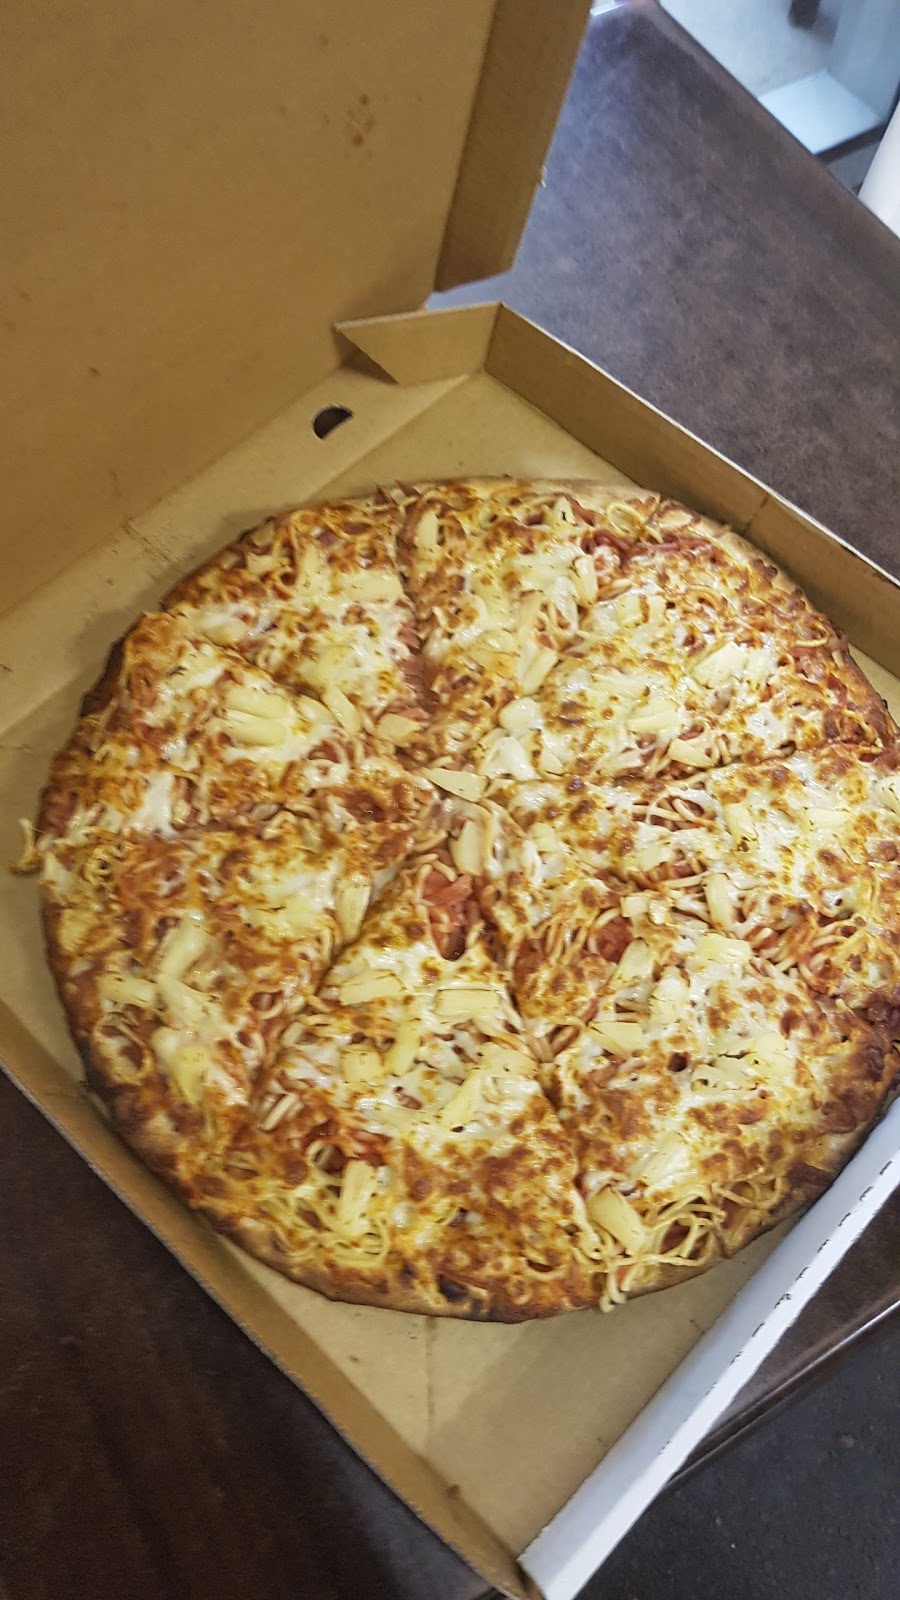 Goofys Pizza House | meal takeaway | 208 Buckley St, Essendon VIC 3040, Australia | 0393371074 OR +61 3 9337 1074